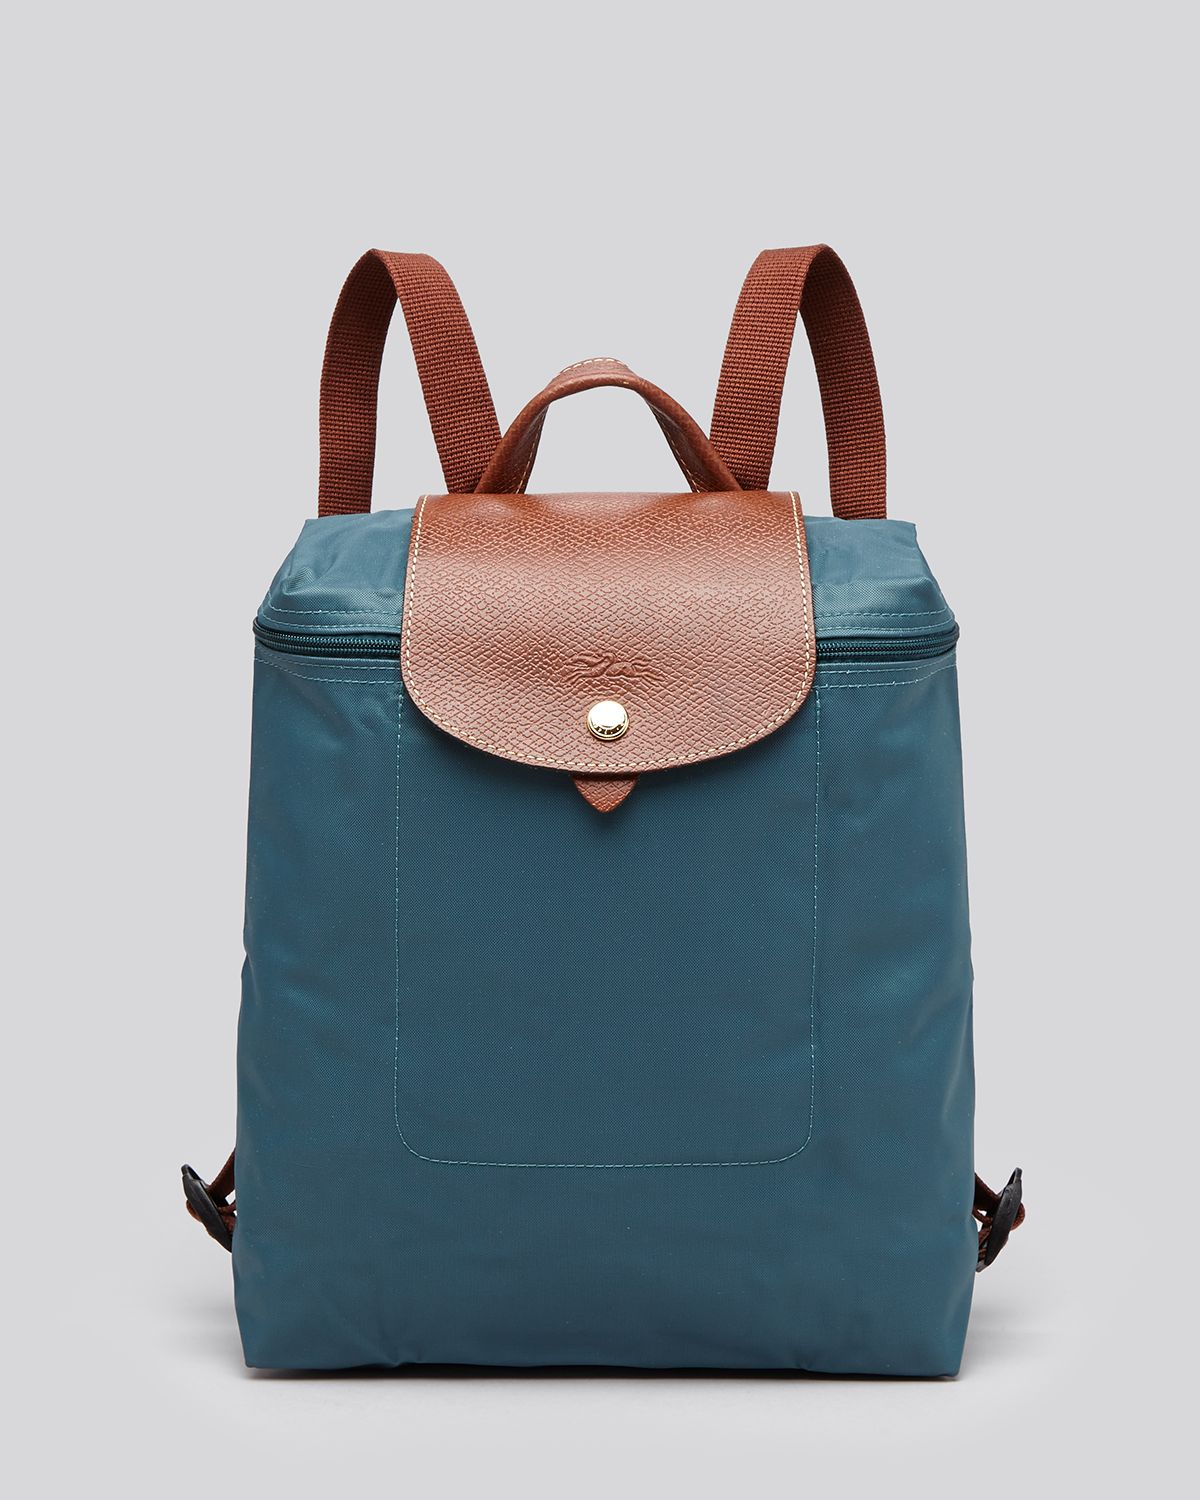 Lyst - Longchamp Backpack - Le Pliage in Green